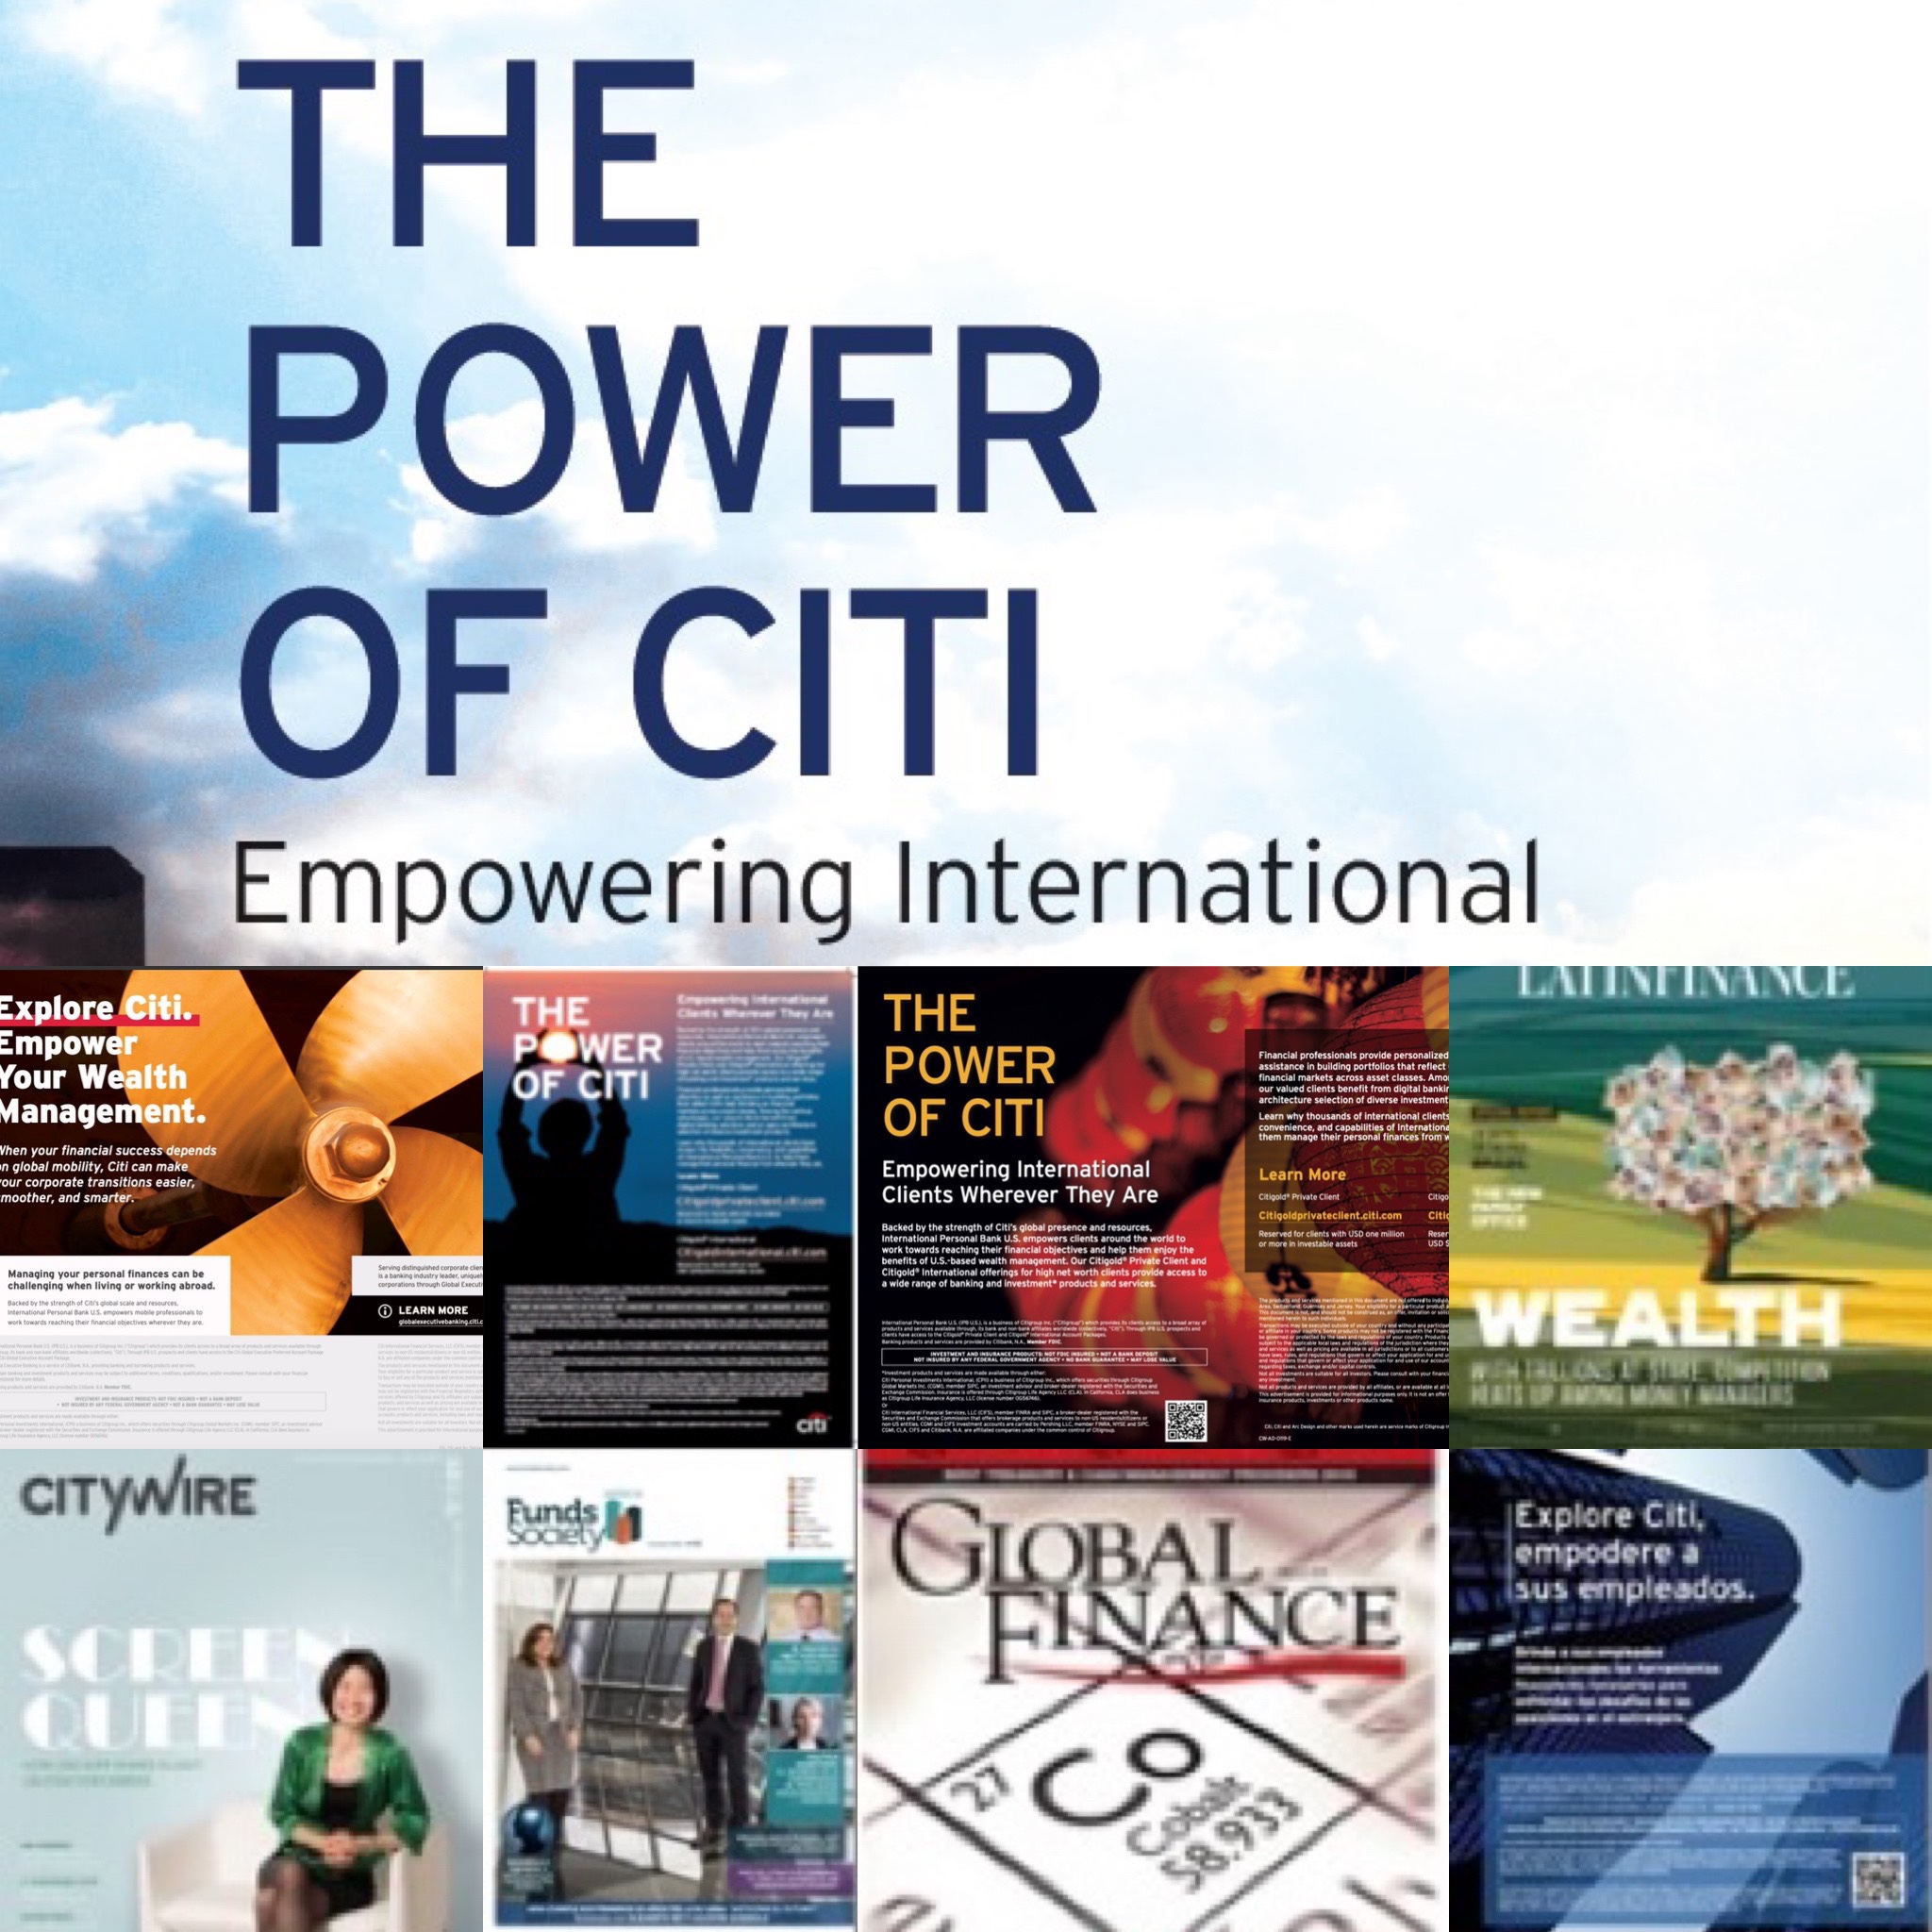 Citibank Offshore magazine covers for 2019 DCW Media campaign